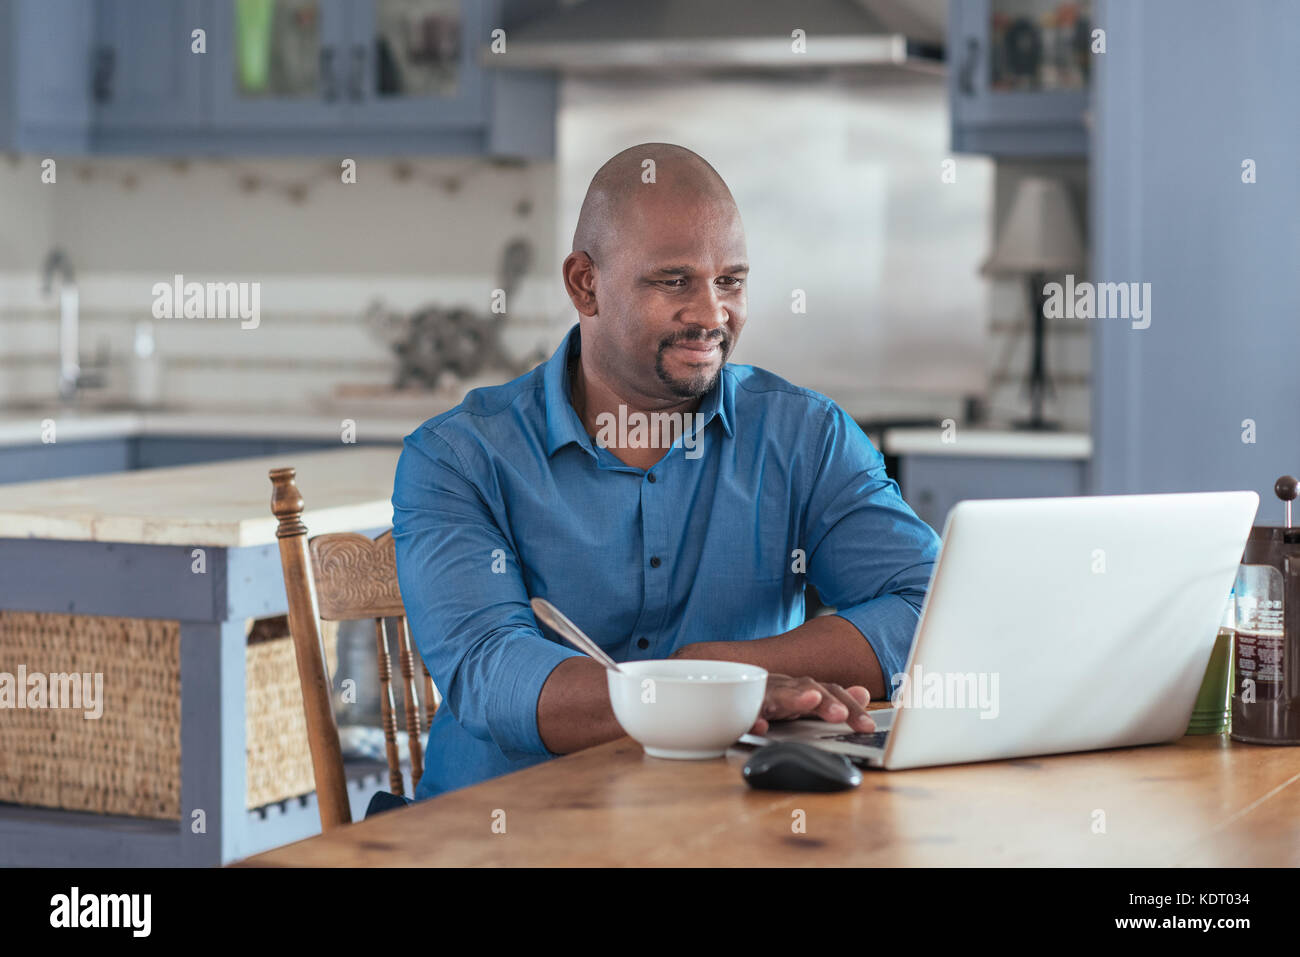 Mature African man browsing online with a laptop over breakfast Stock Photo